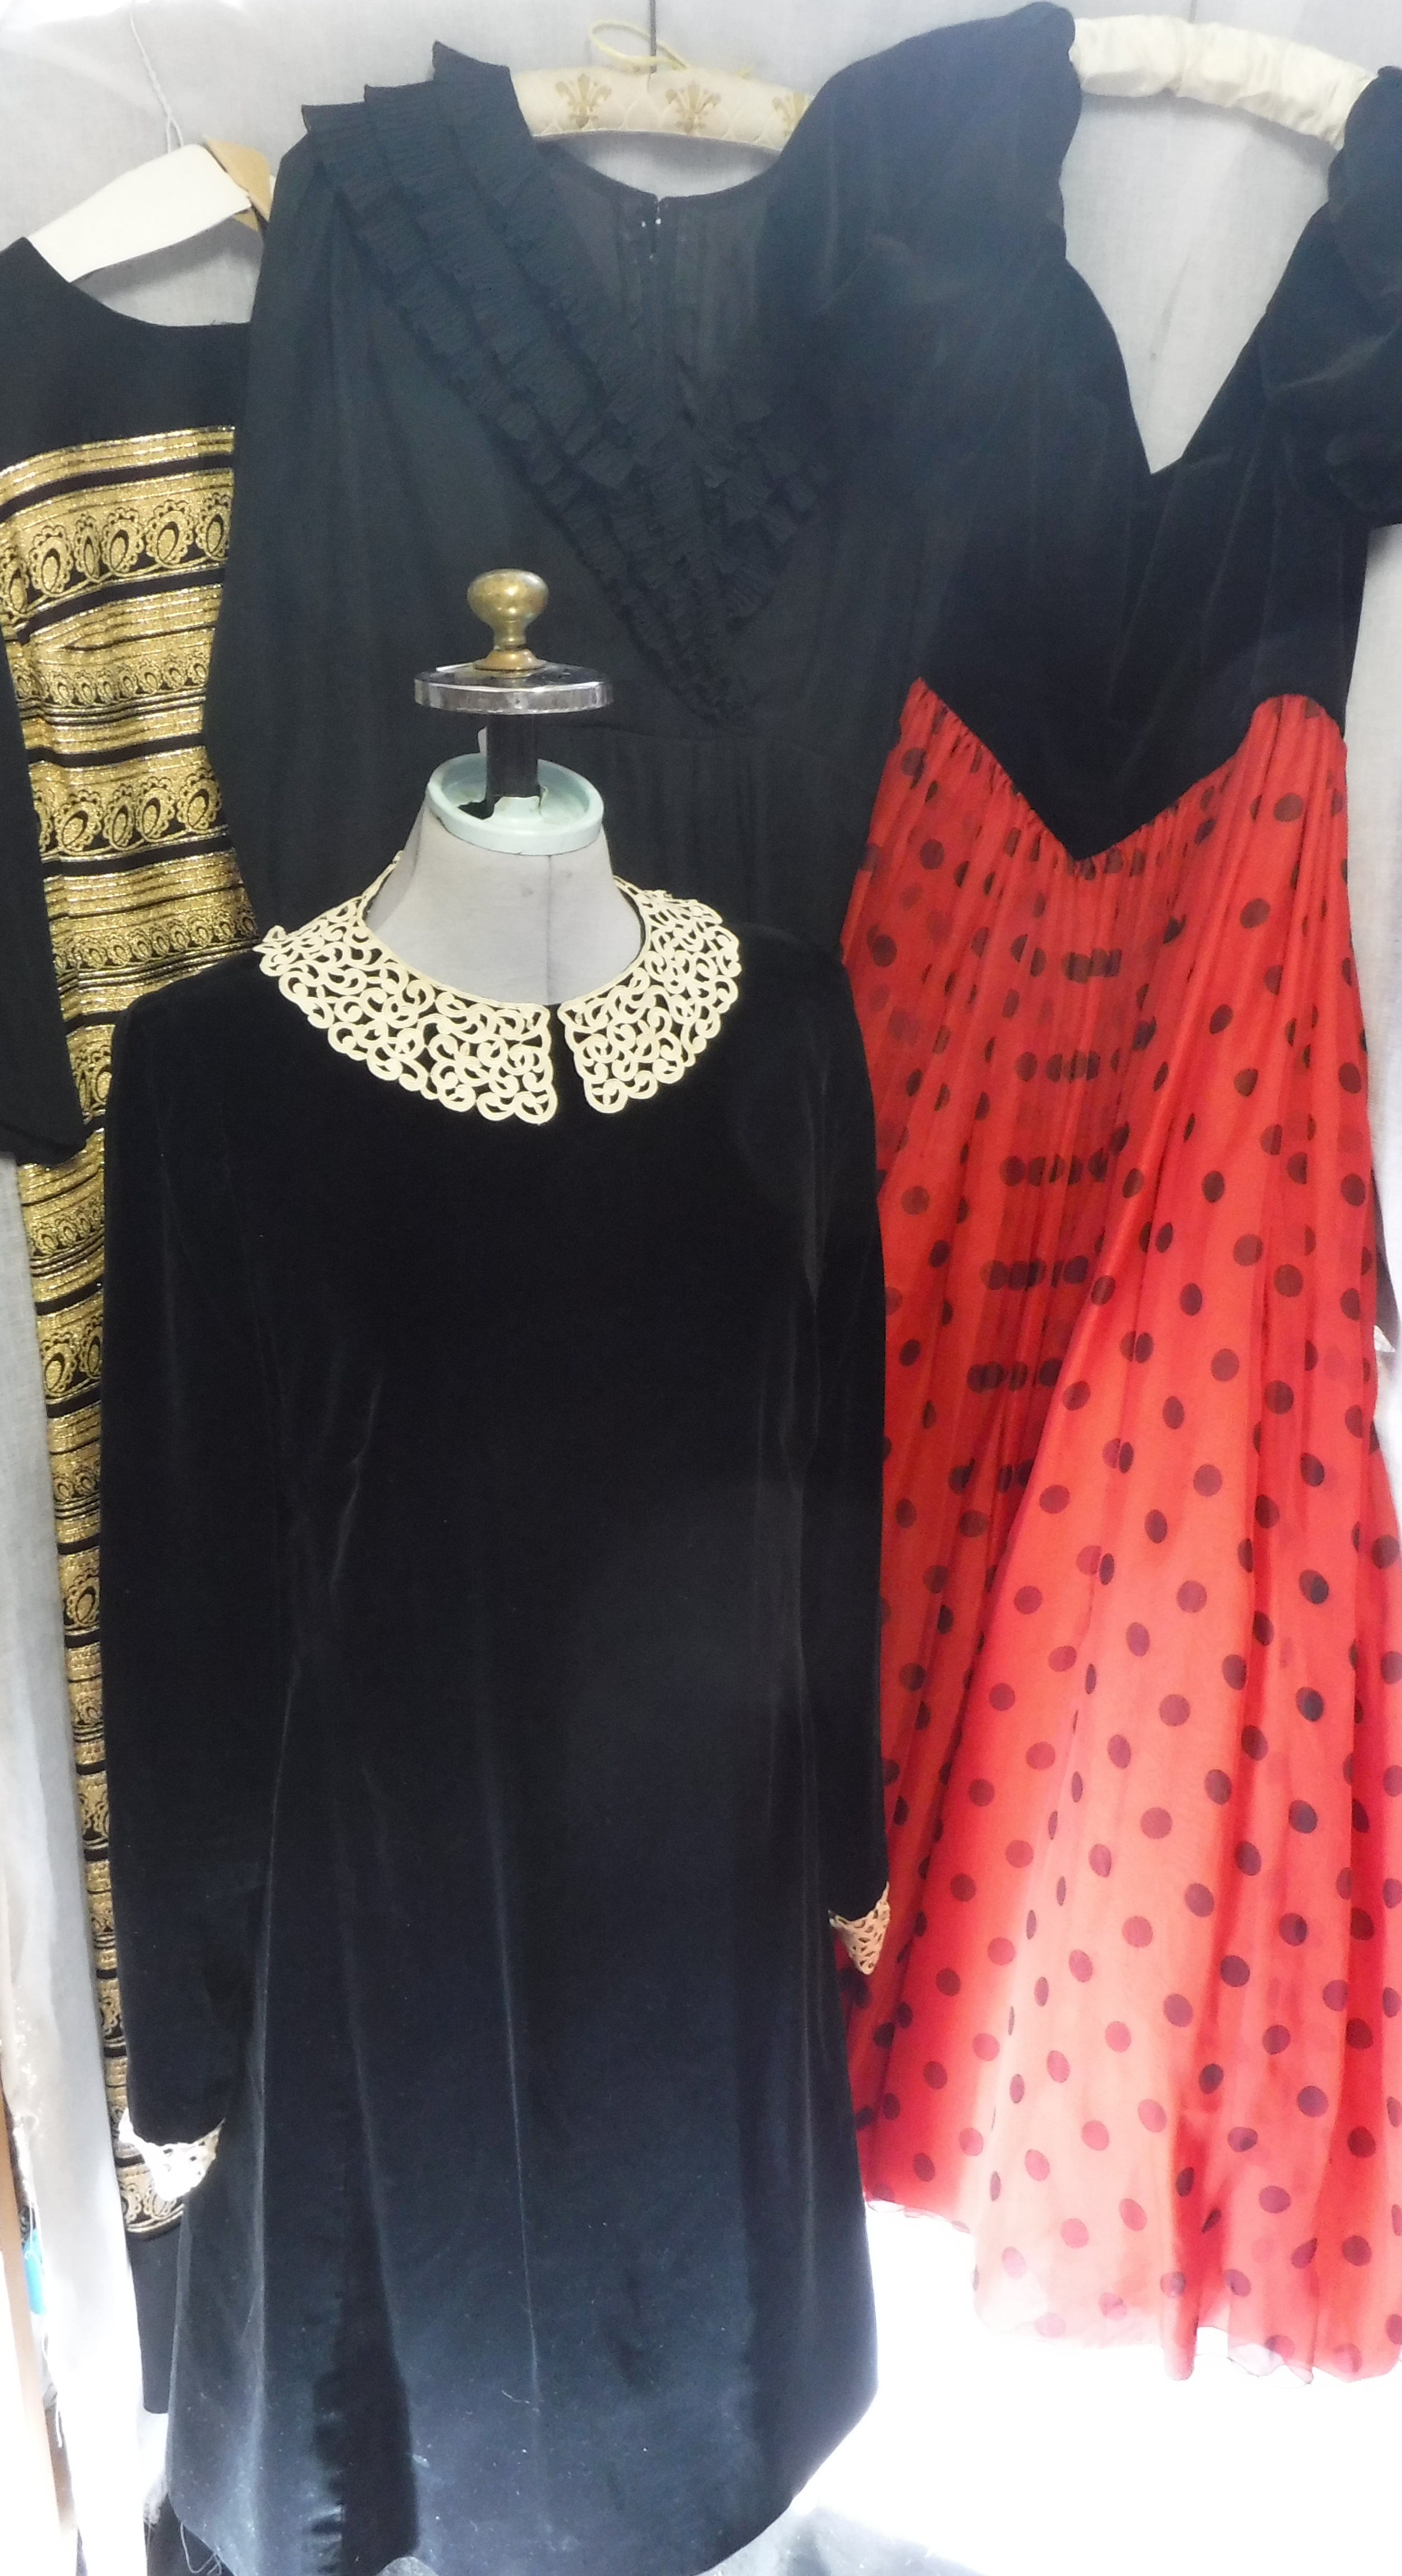 'HARDY AMIES': A VINTAGE BLACK AND GOLD BROCADE EVENING DRESS, a black velvet dress with lace collar